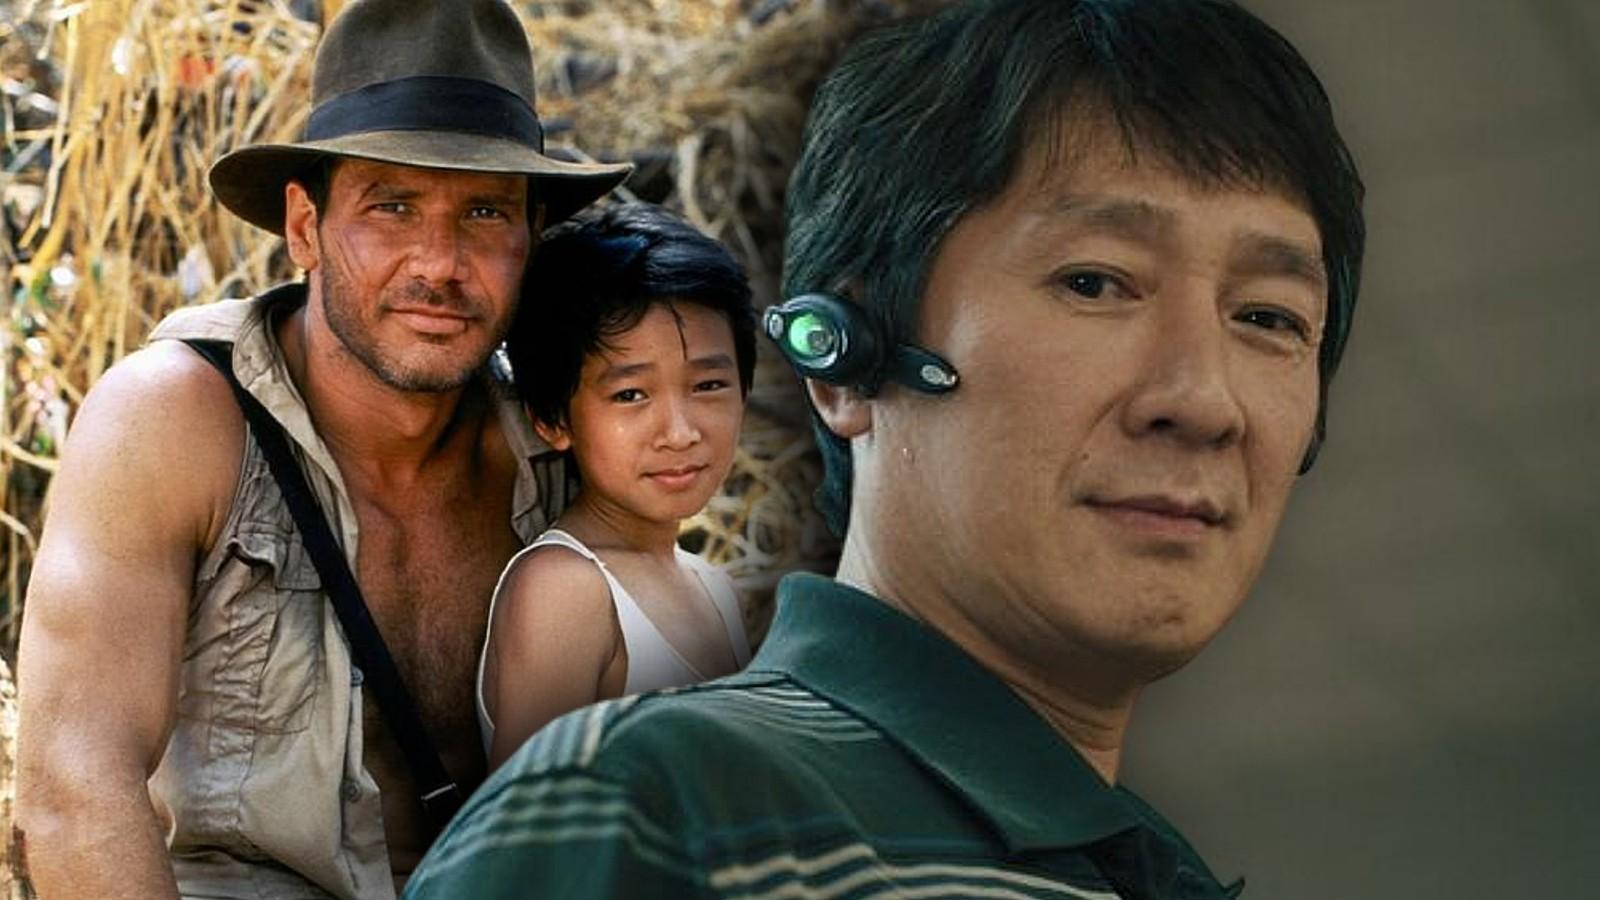 Short Round and Indiana Jones in the Temple of Doom, and Ke Huy Quan in Everything Everywhere All at Once